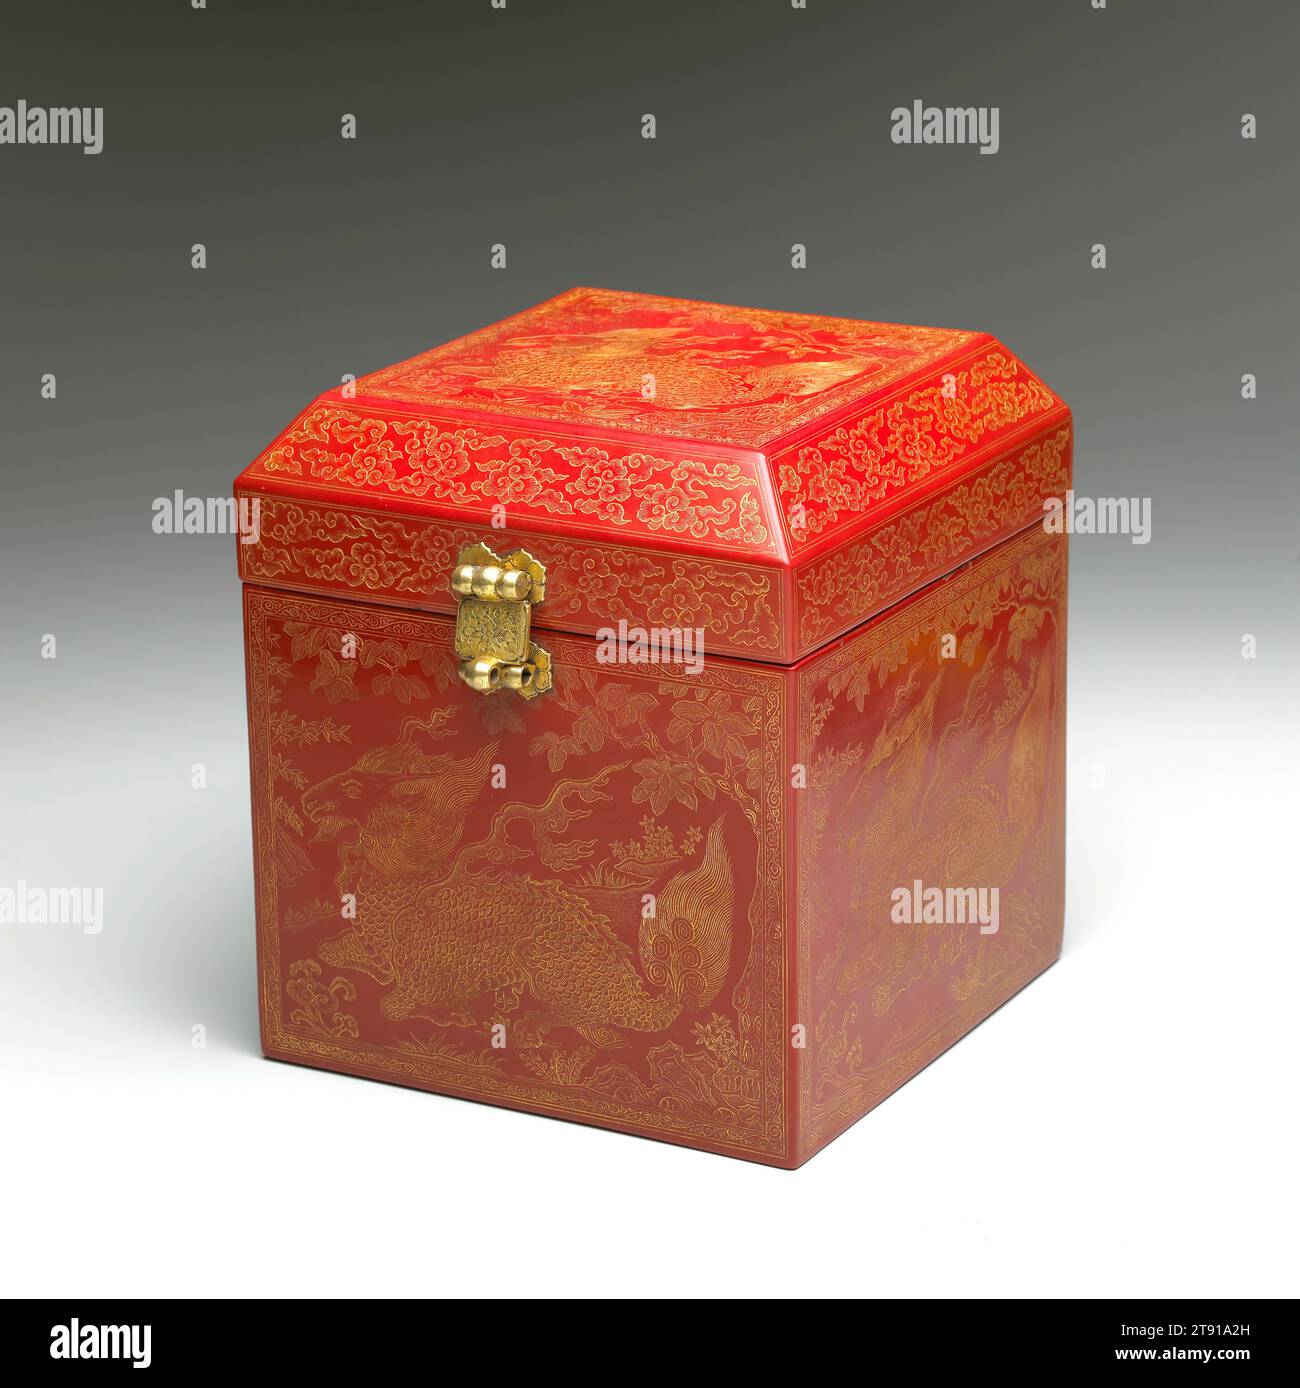 Seal Box, c. 1410, 8 5/8 x 7 3/4 x 7 3/4 in. (21.9 x 19.7 x 19.7 cm), Red lacquer with engraved gold decoration (qiangjin), China, 15th century, Made in the imperial Chinese workshops, large, elaborate seals presented in luxurious boxes were among the gifts bestowed on a number of Tibetan dignitaries who traveled to China’s capital for audiences with the Xuande (r. 1426-35) and Yongle (r. 1403-24) emperors. This presentation box is one of the few known to have survived to the present day, and was possibly given to a Tibetan hierarch in the early 1400s. Stock Photo